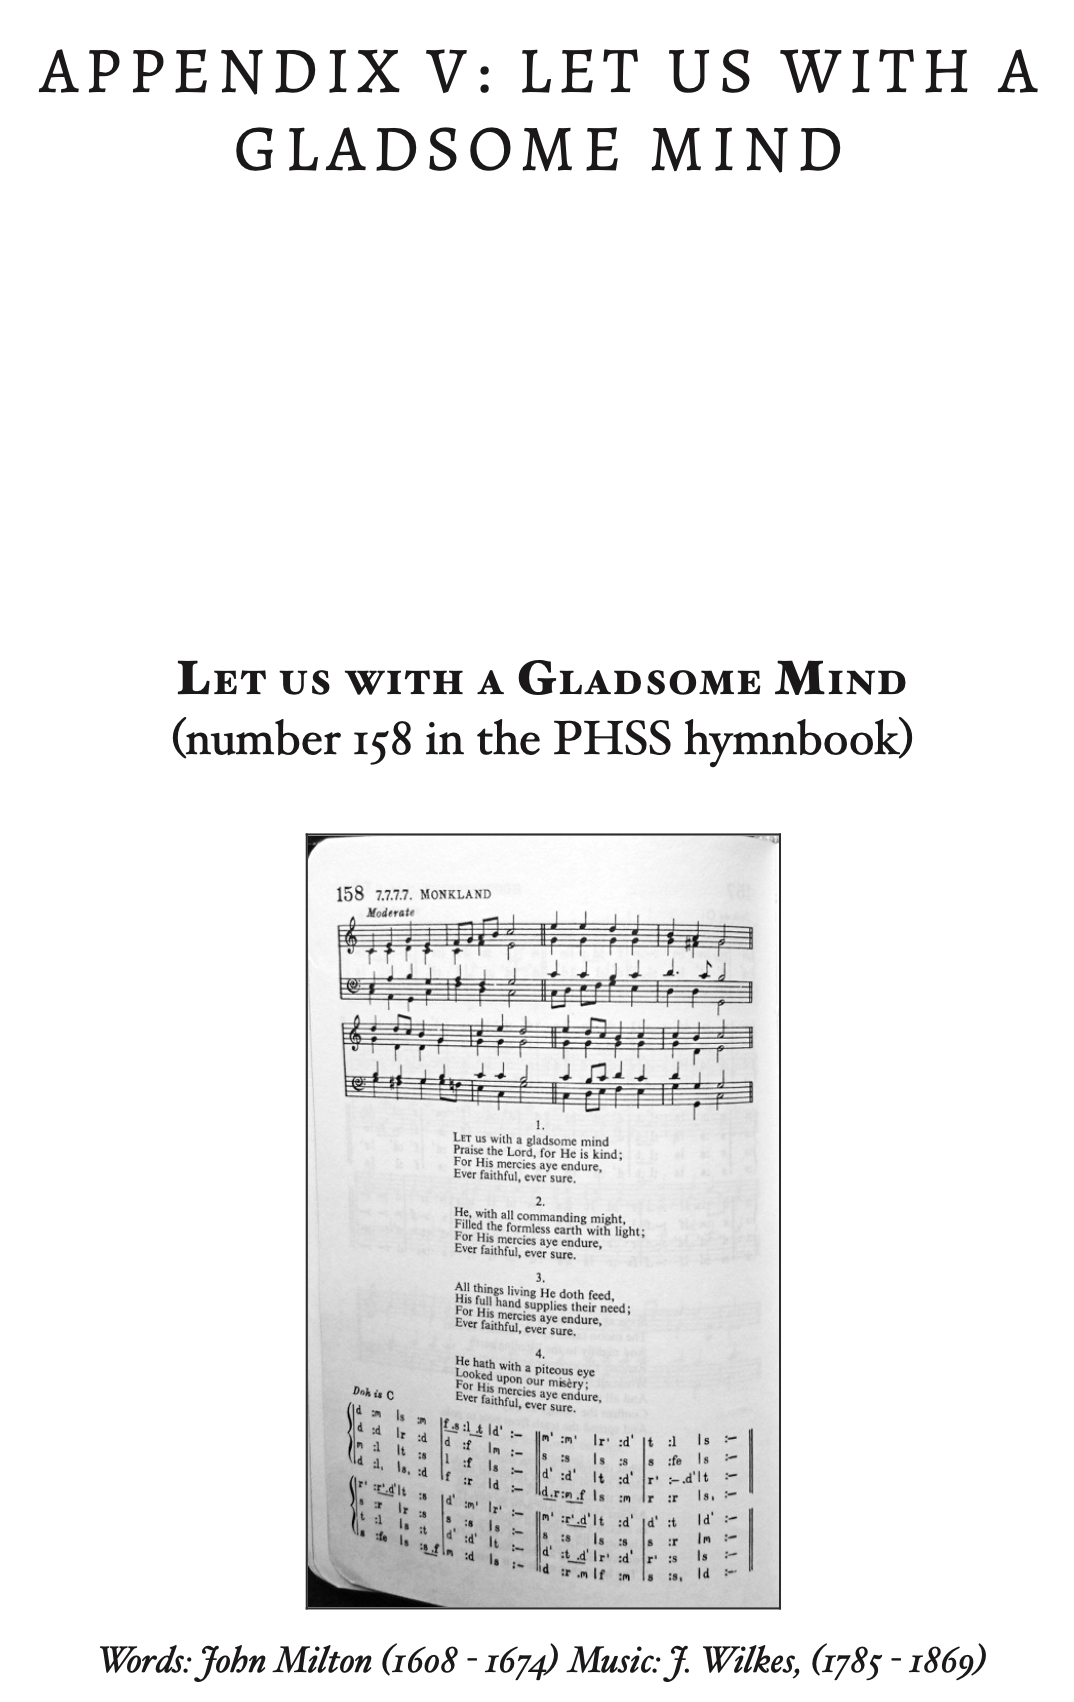 facsimile of PHSS 158 "Let us with a gladsome mind"